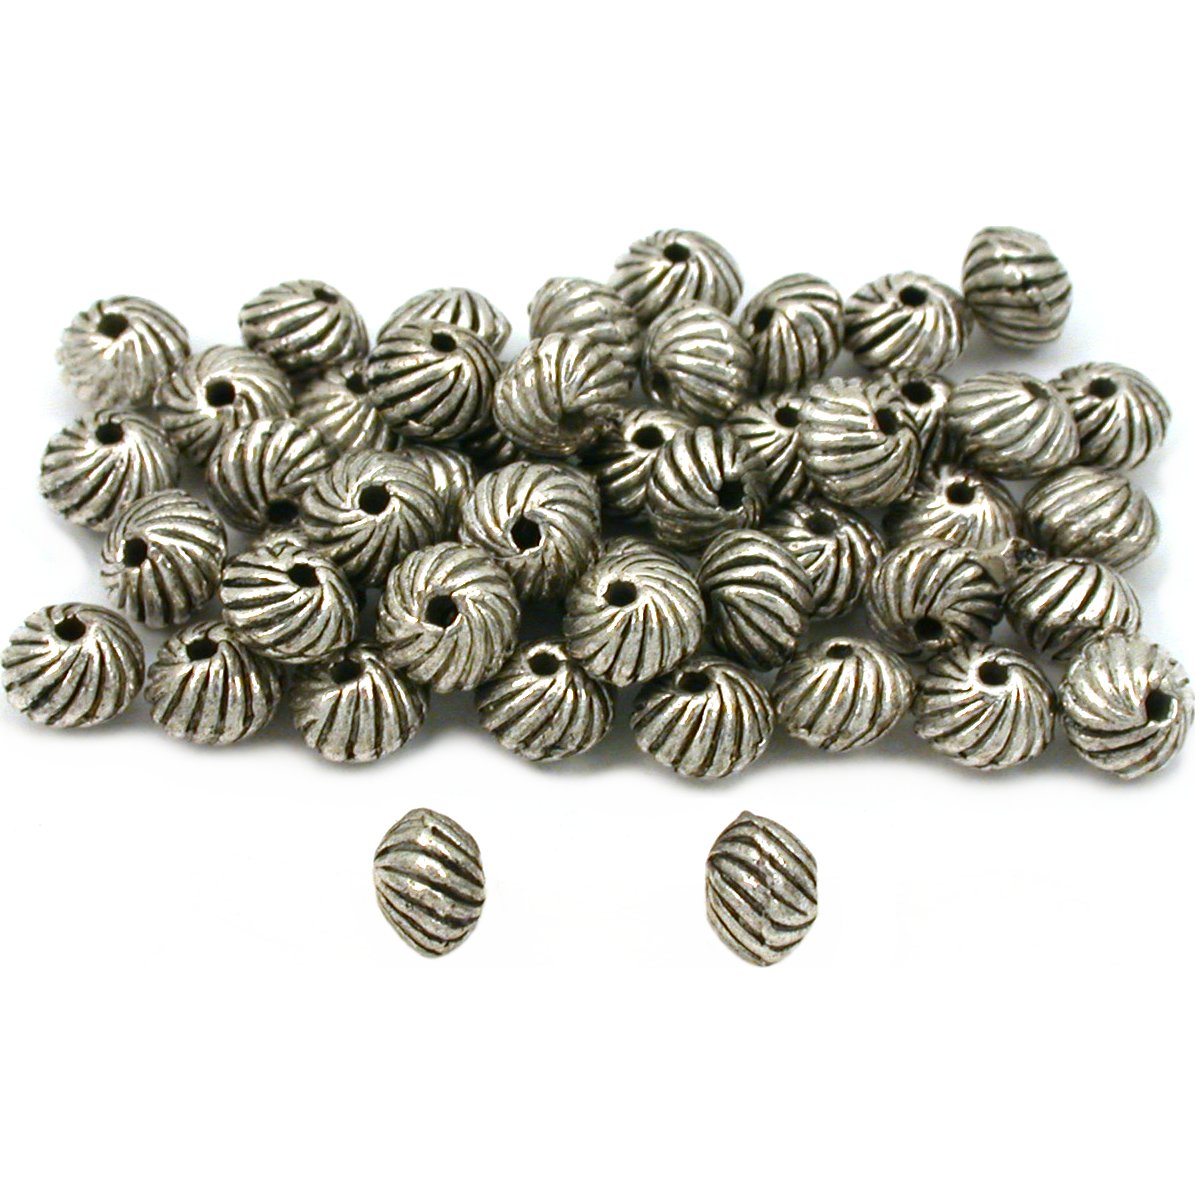 Bali Saucer Beads Antique Silver Plated 6.5mm 50Pcs Approx.